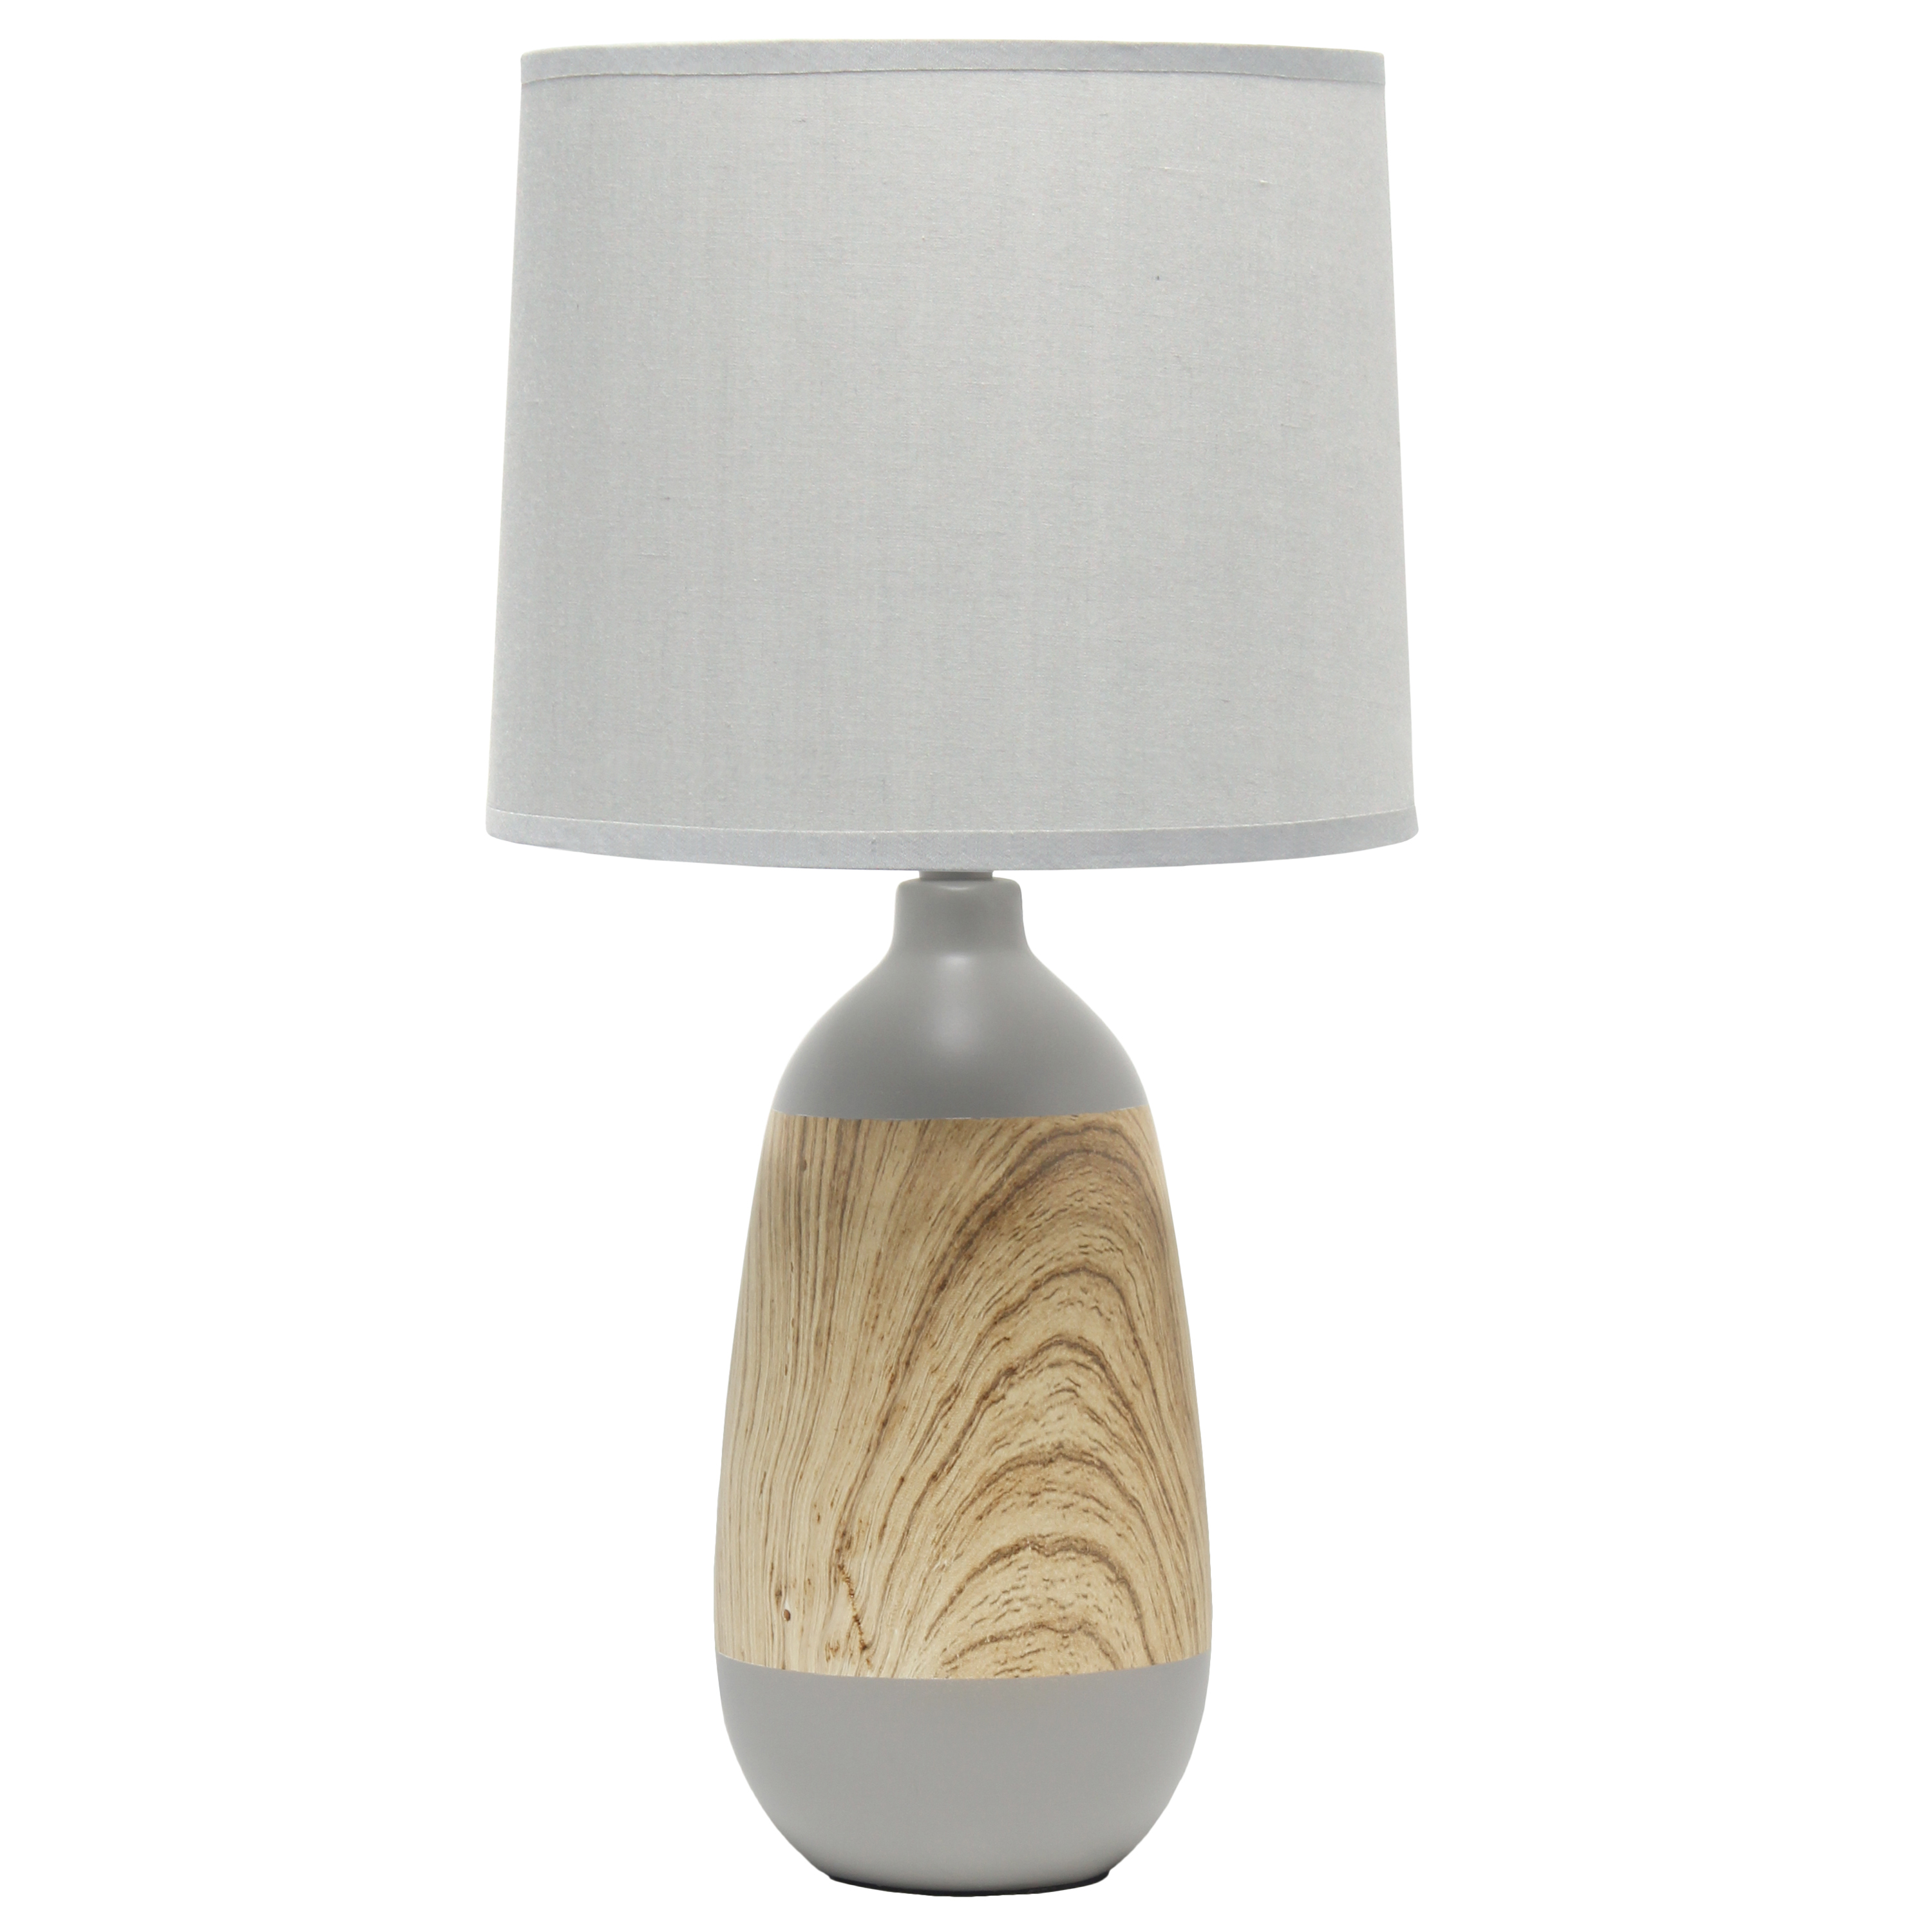 Simple Designs Ceramic Oblong Table Lamp, Light Wood and Gray